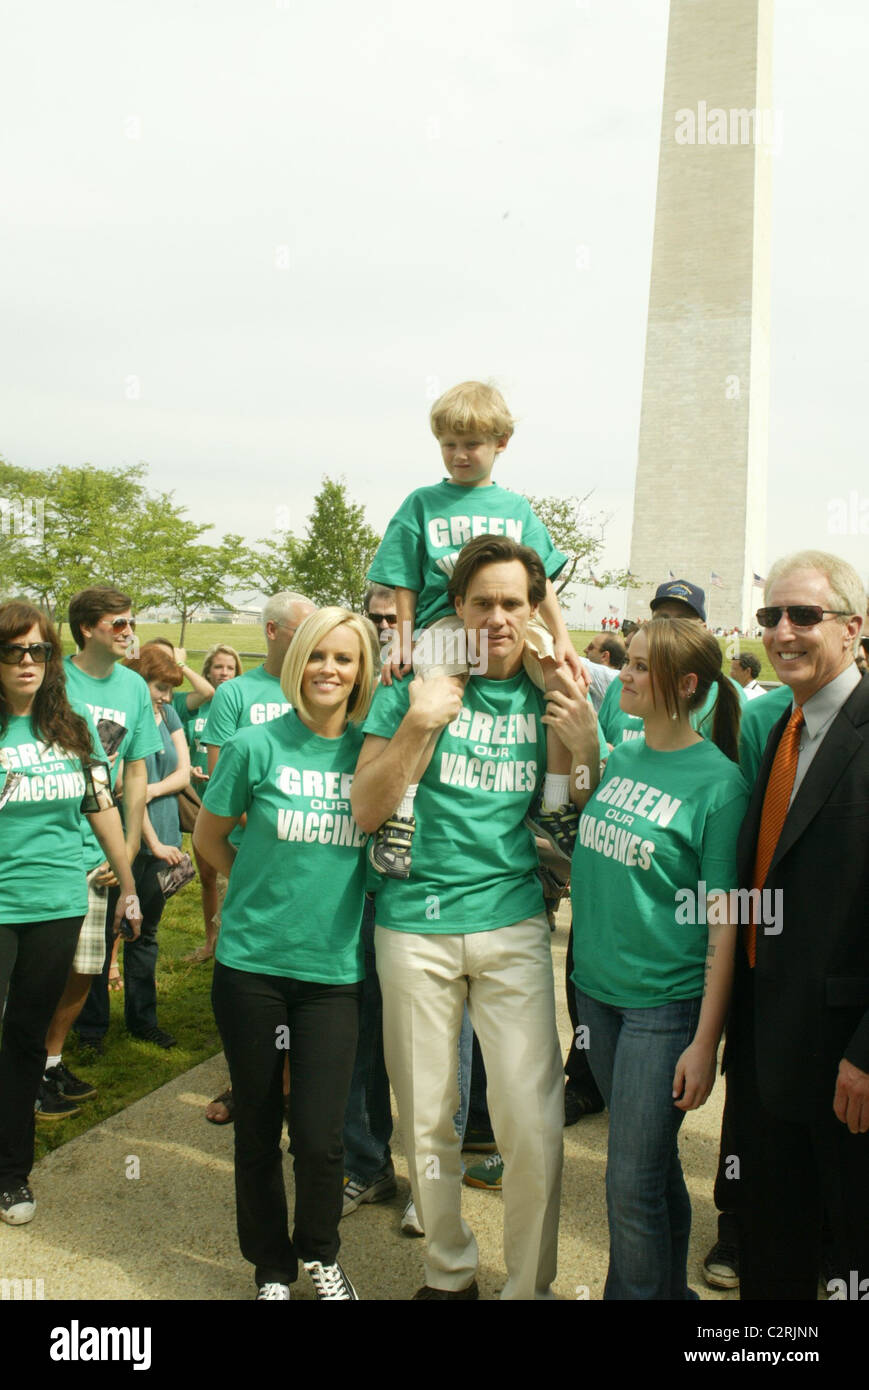 Jenny McCarthy, Evan McCarthy, Jim Carrey and Jane Carrey lead the 'Green Our Vaccines' march, rally and press conference at Stock Photo